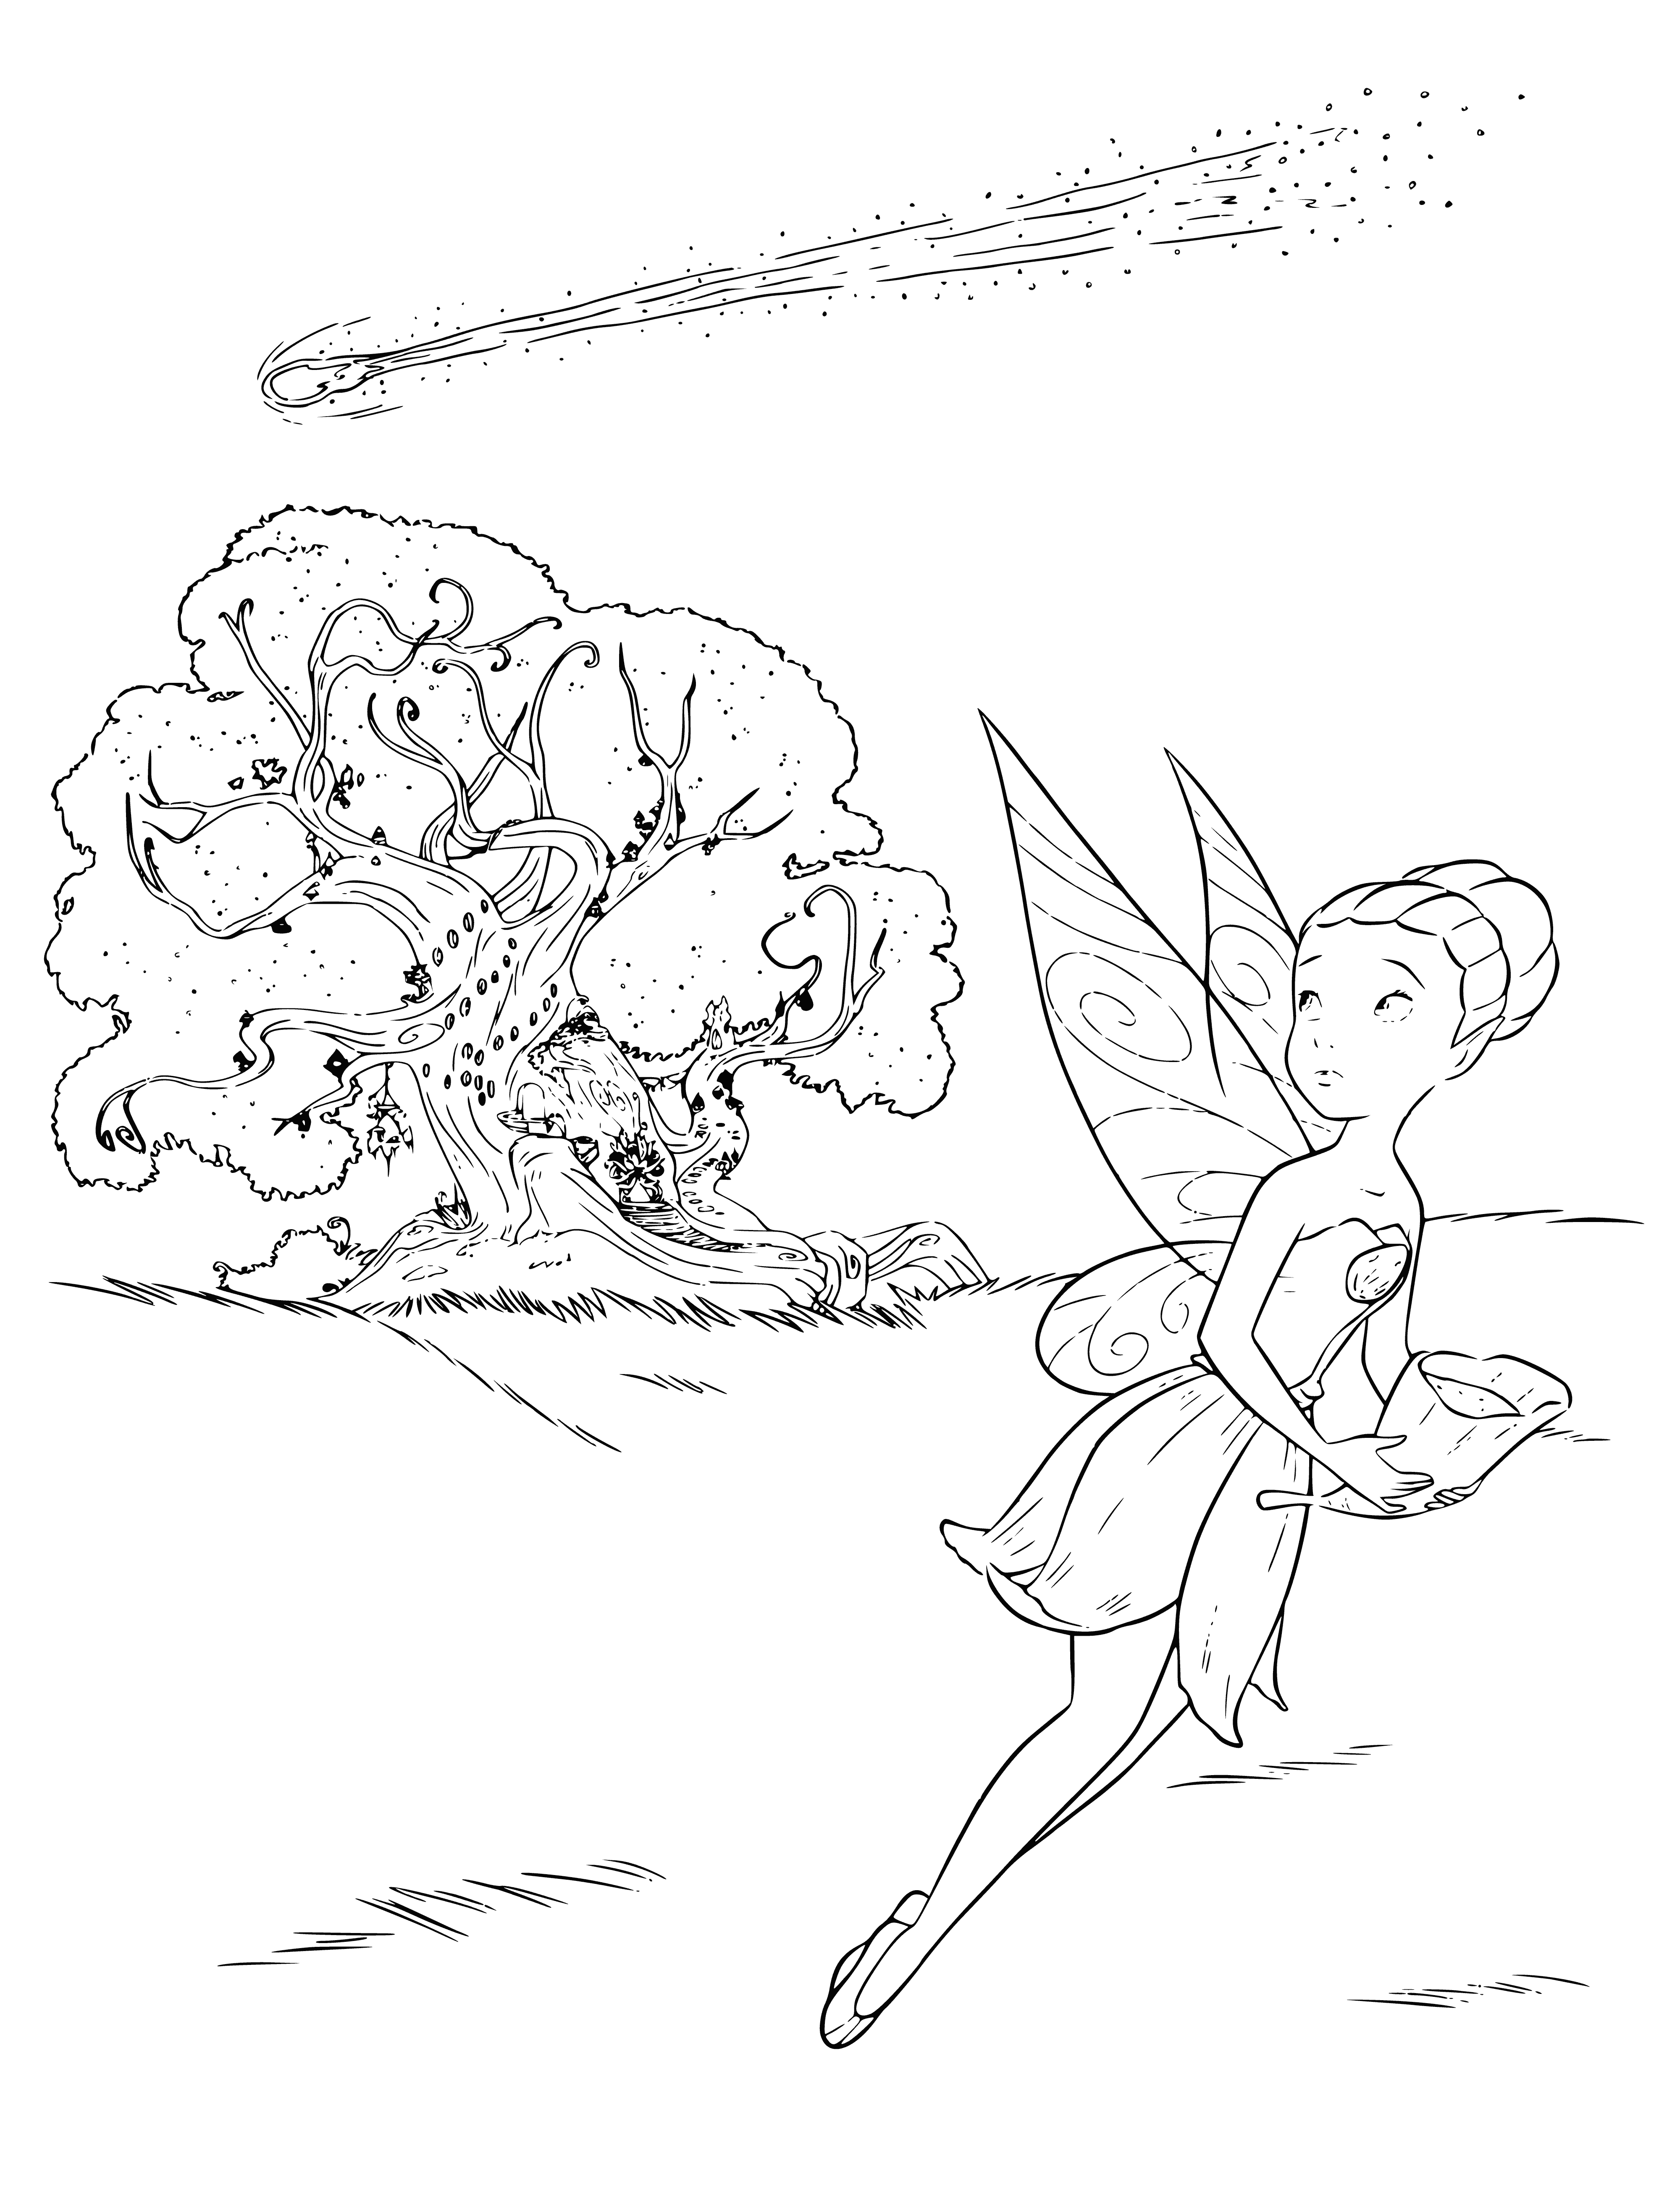 Iridessa saw a comet in the sky coloring page